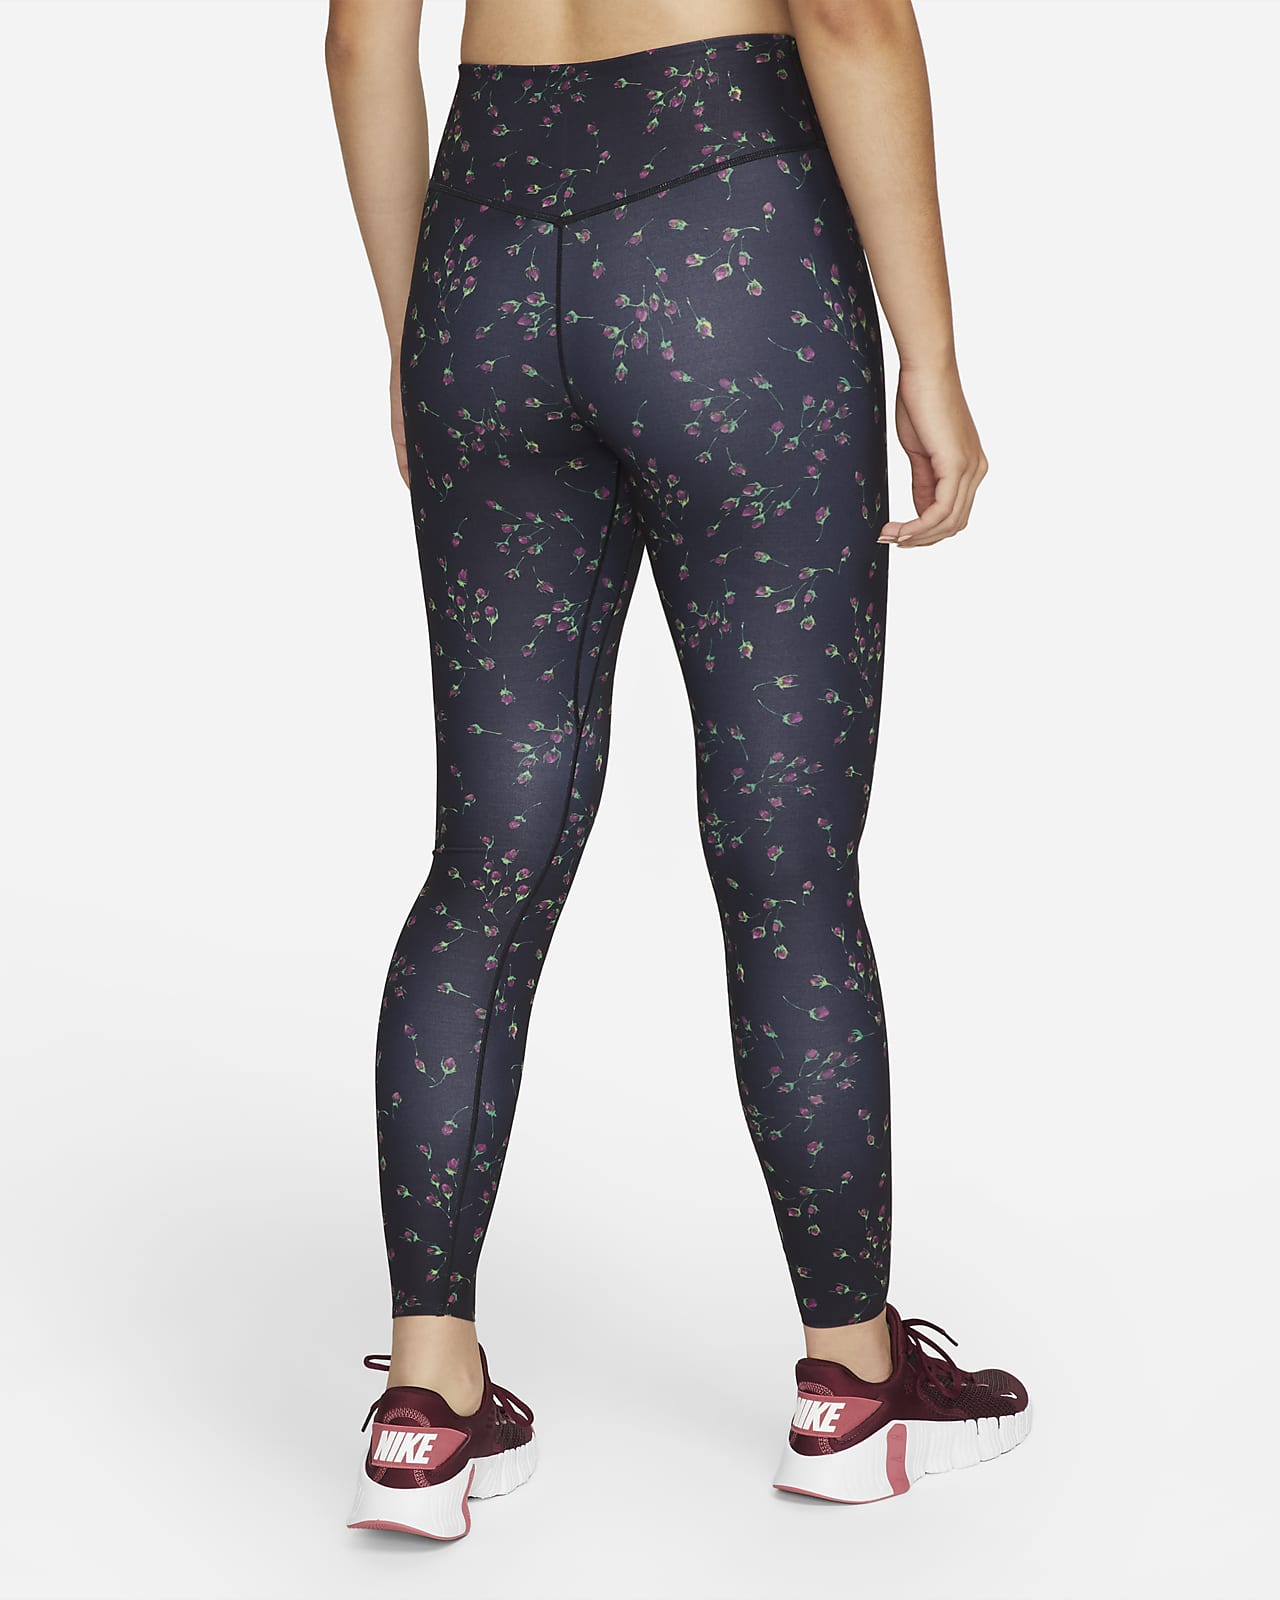 Nike Women's One Luxe Tights